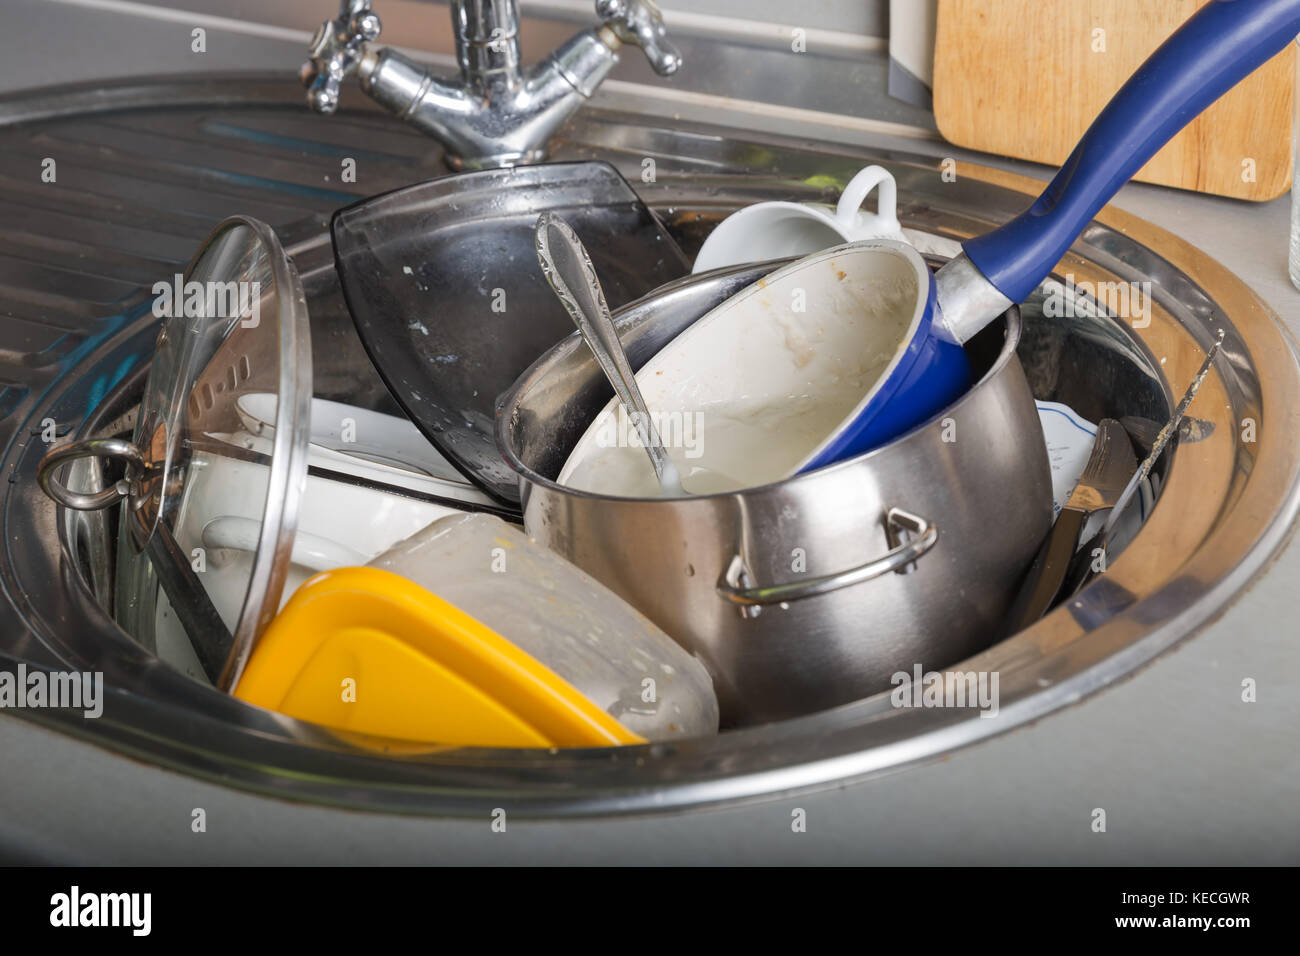 Pile of dirty dishes in the kitchen sink Stock Photo